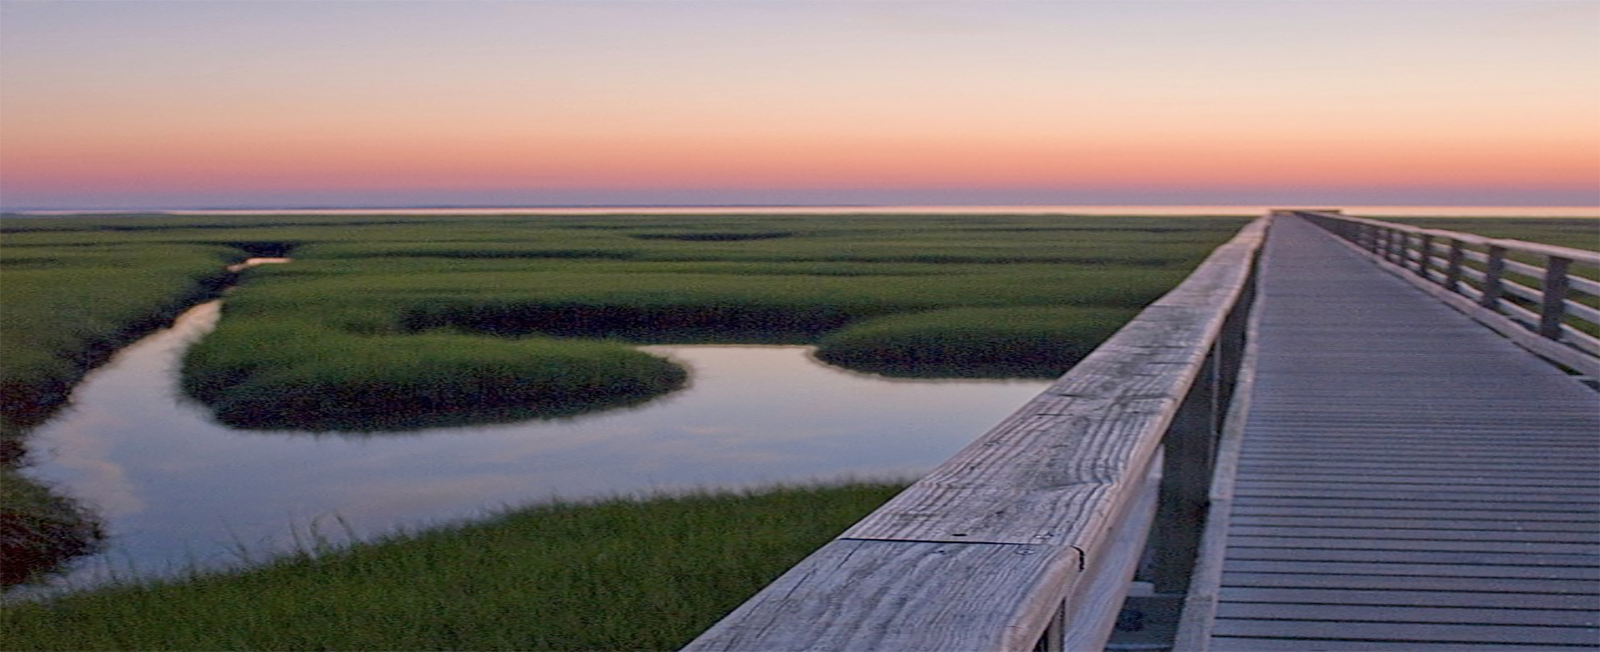 Looking to get an amazing picture on Cape Cod? Check out these ten photo worthy locations.